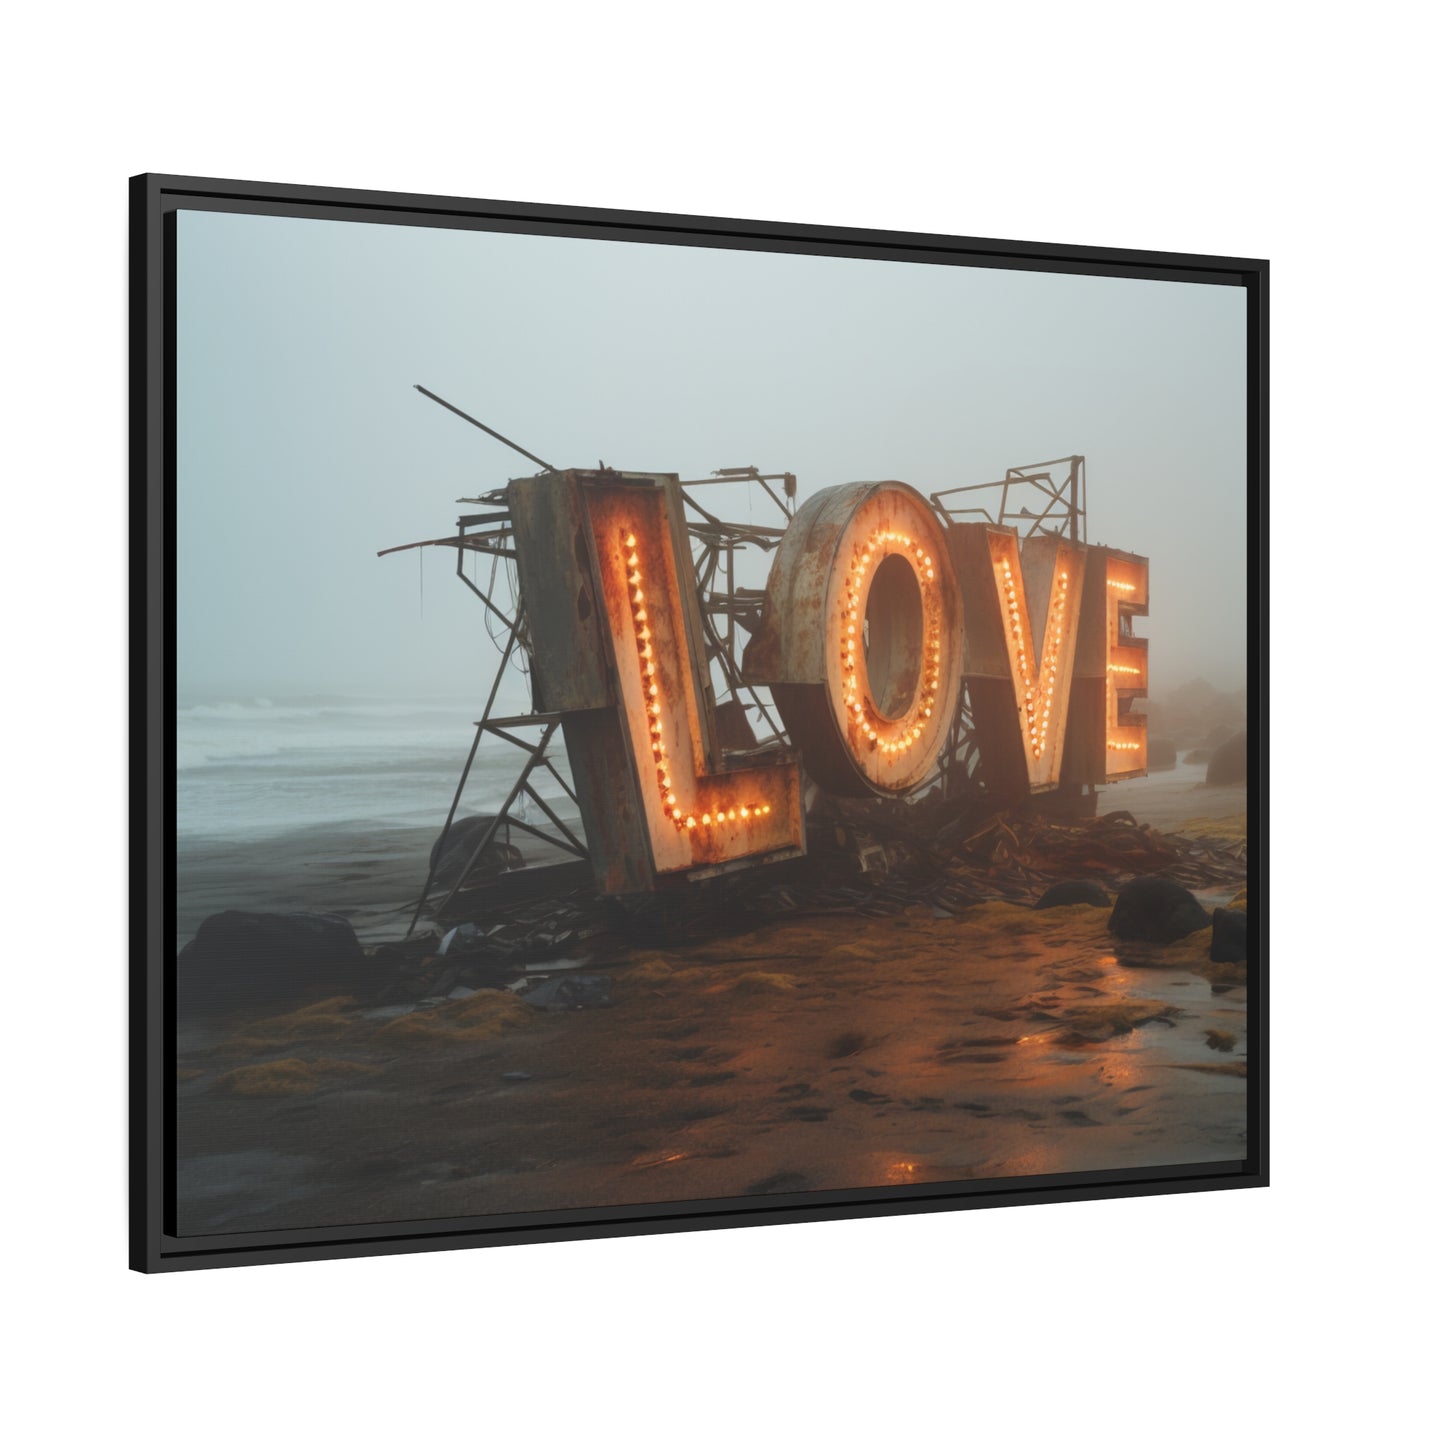 Fine art Framed Canvas print - Matte Canvas with a Black Frame - Surreal LOVE sign wall decor